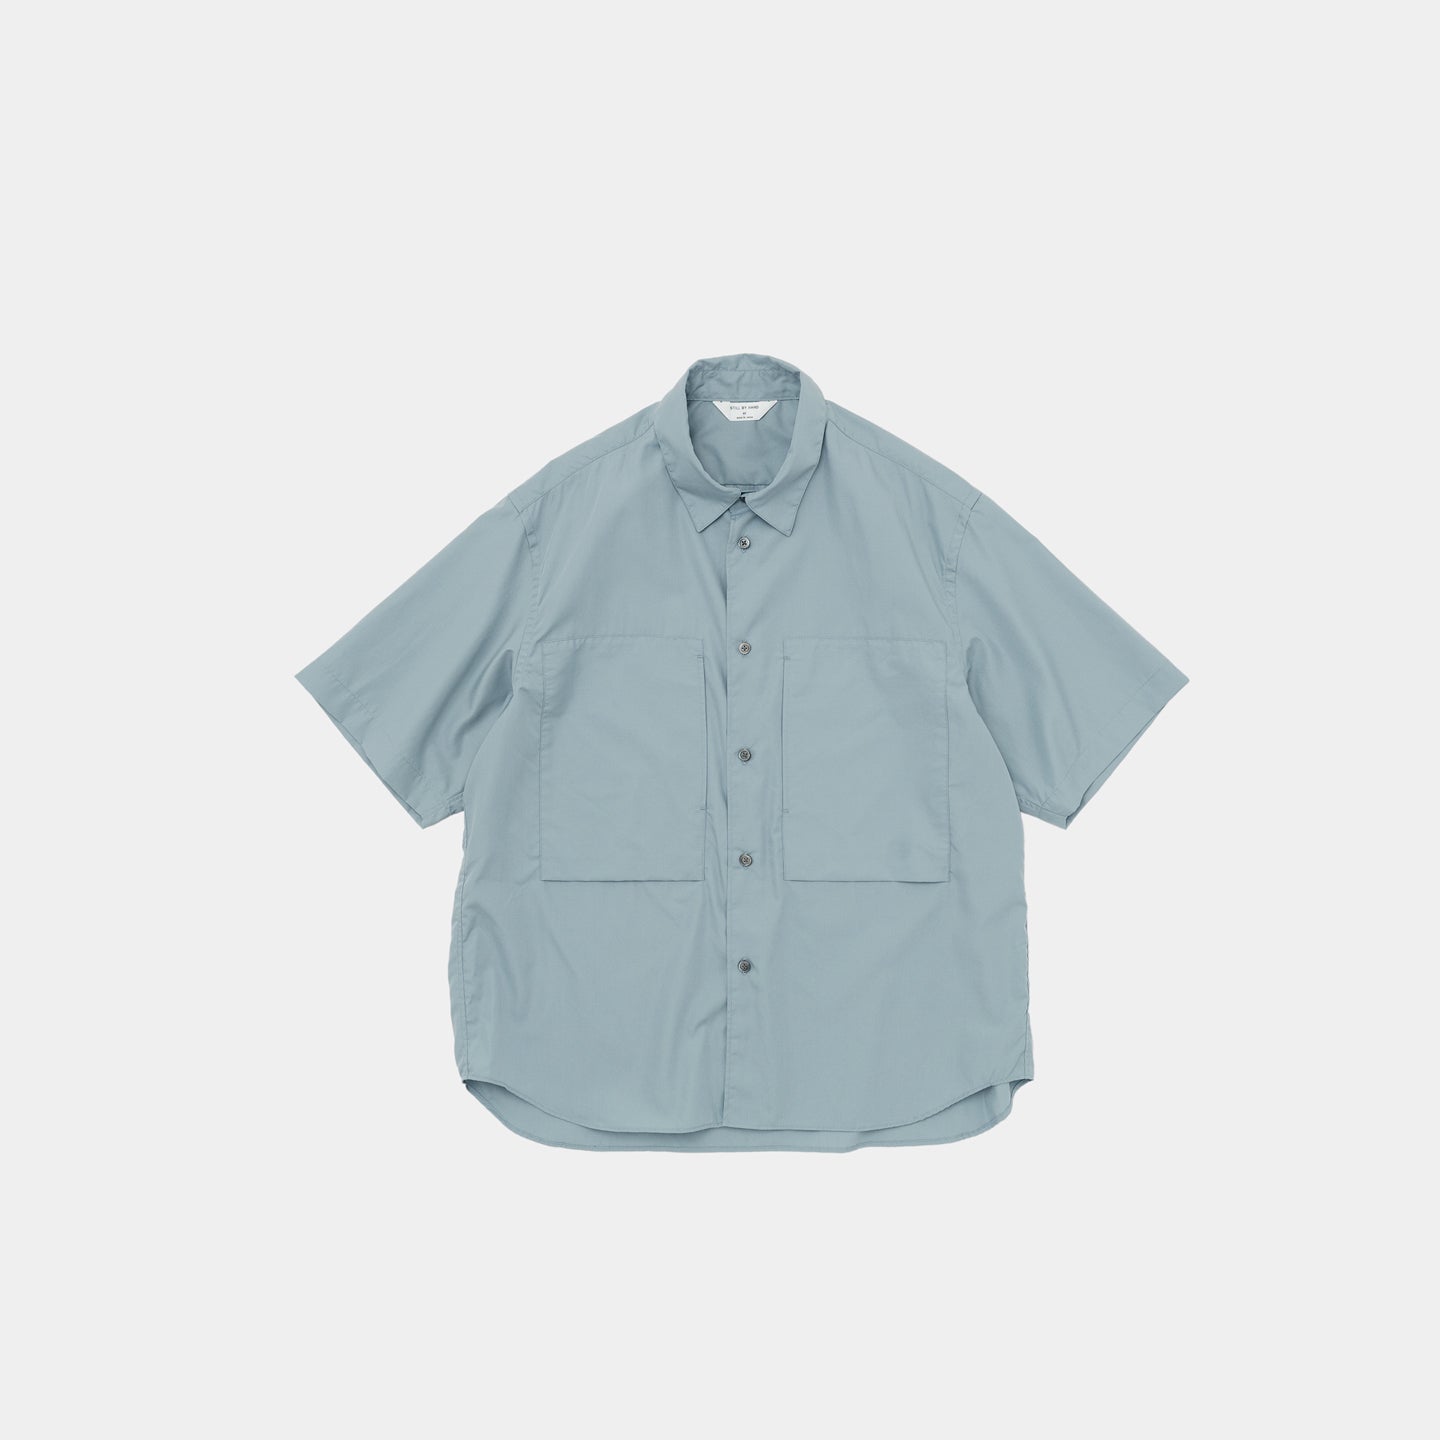 STILL BY HAND Double Pocket Shirt LEO BOUTIQUE